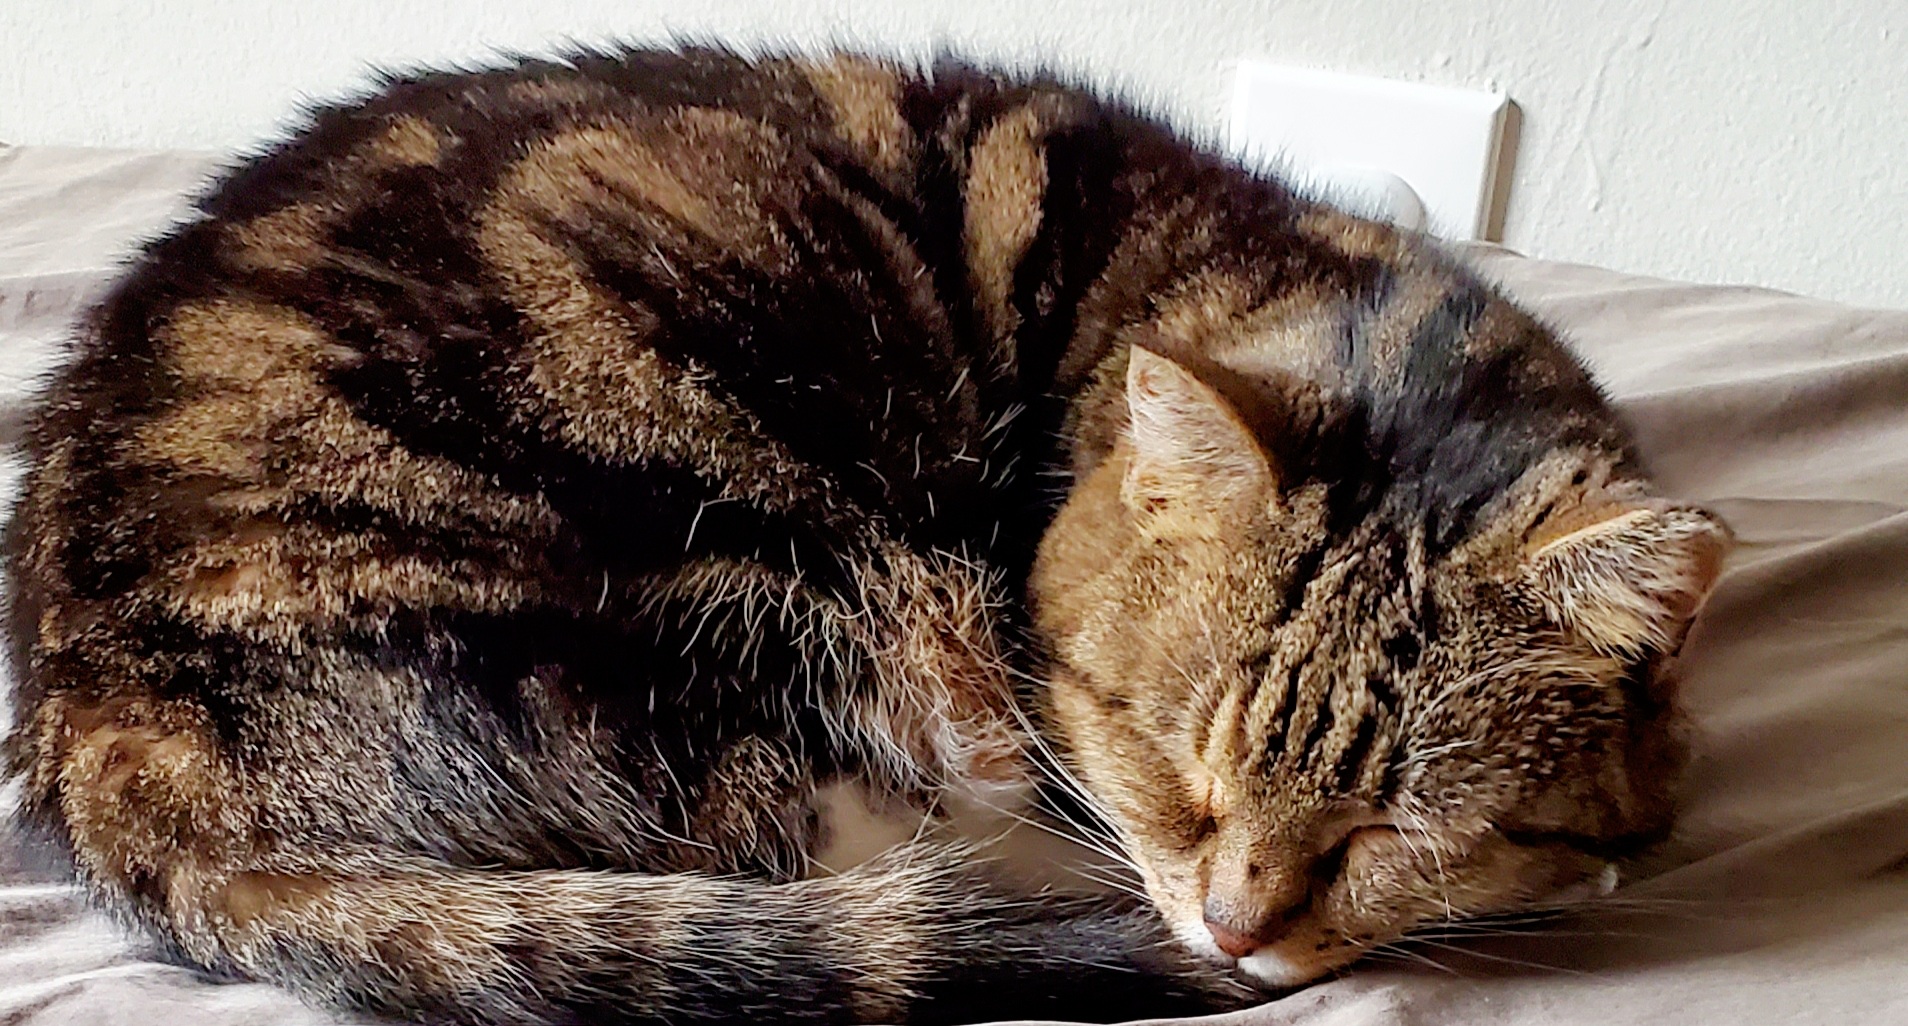 A sweet tabby cat is curled up and sleeping.